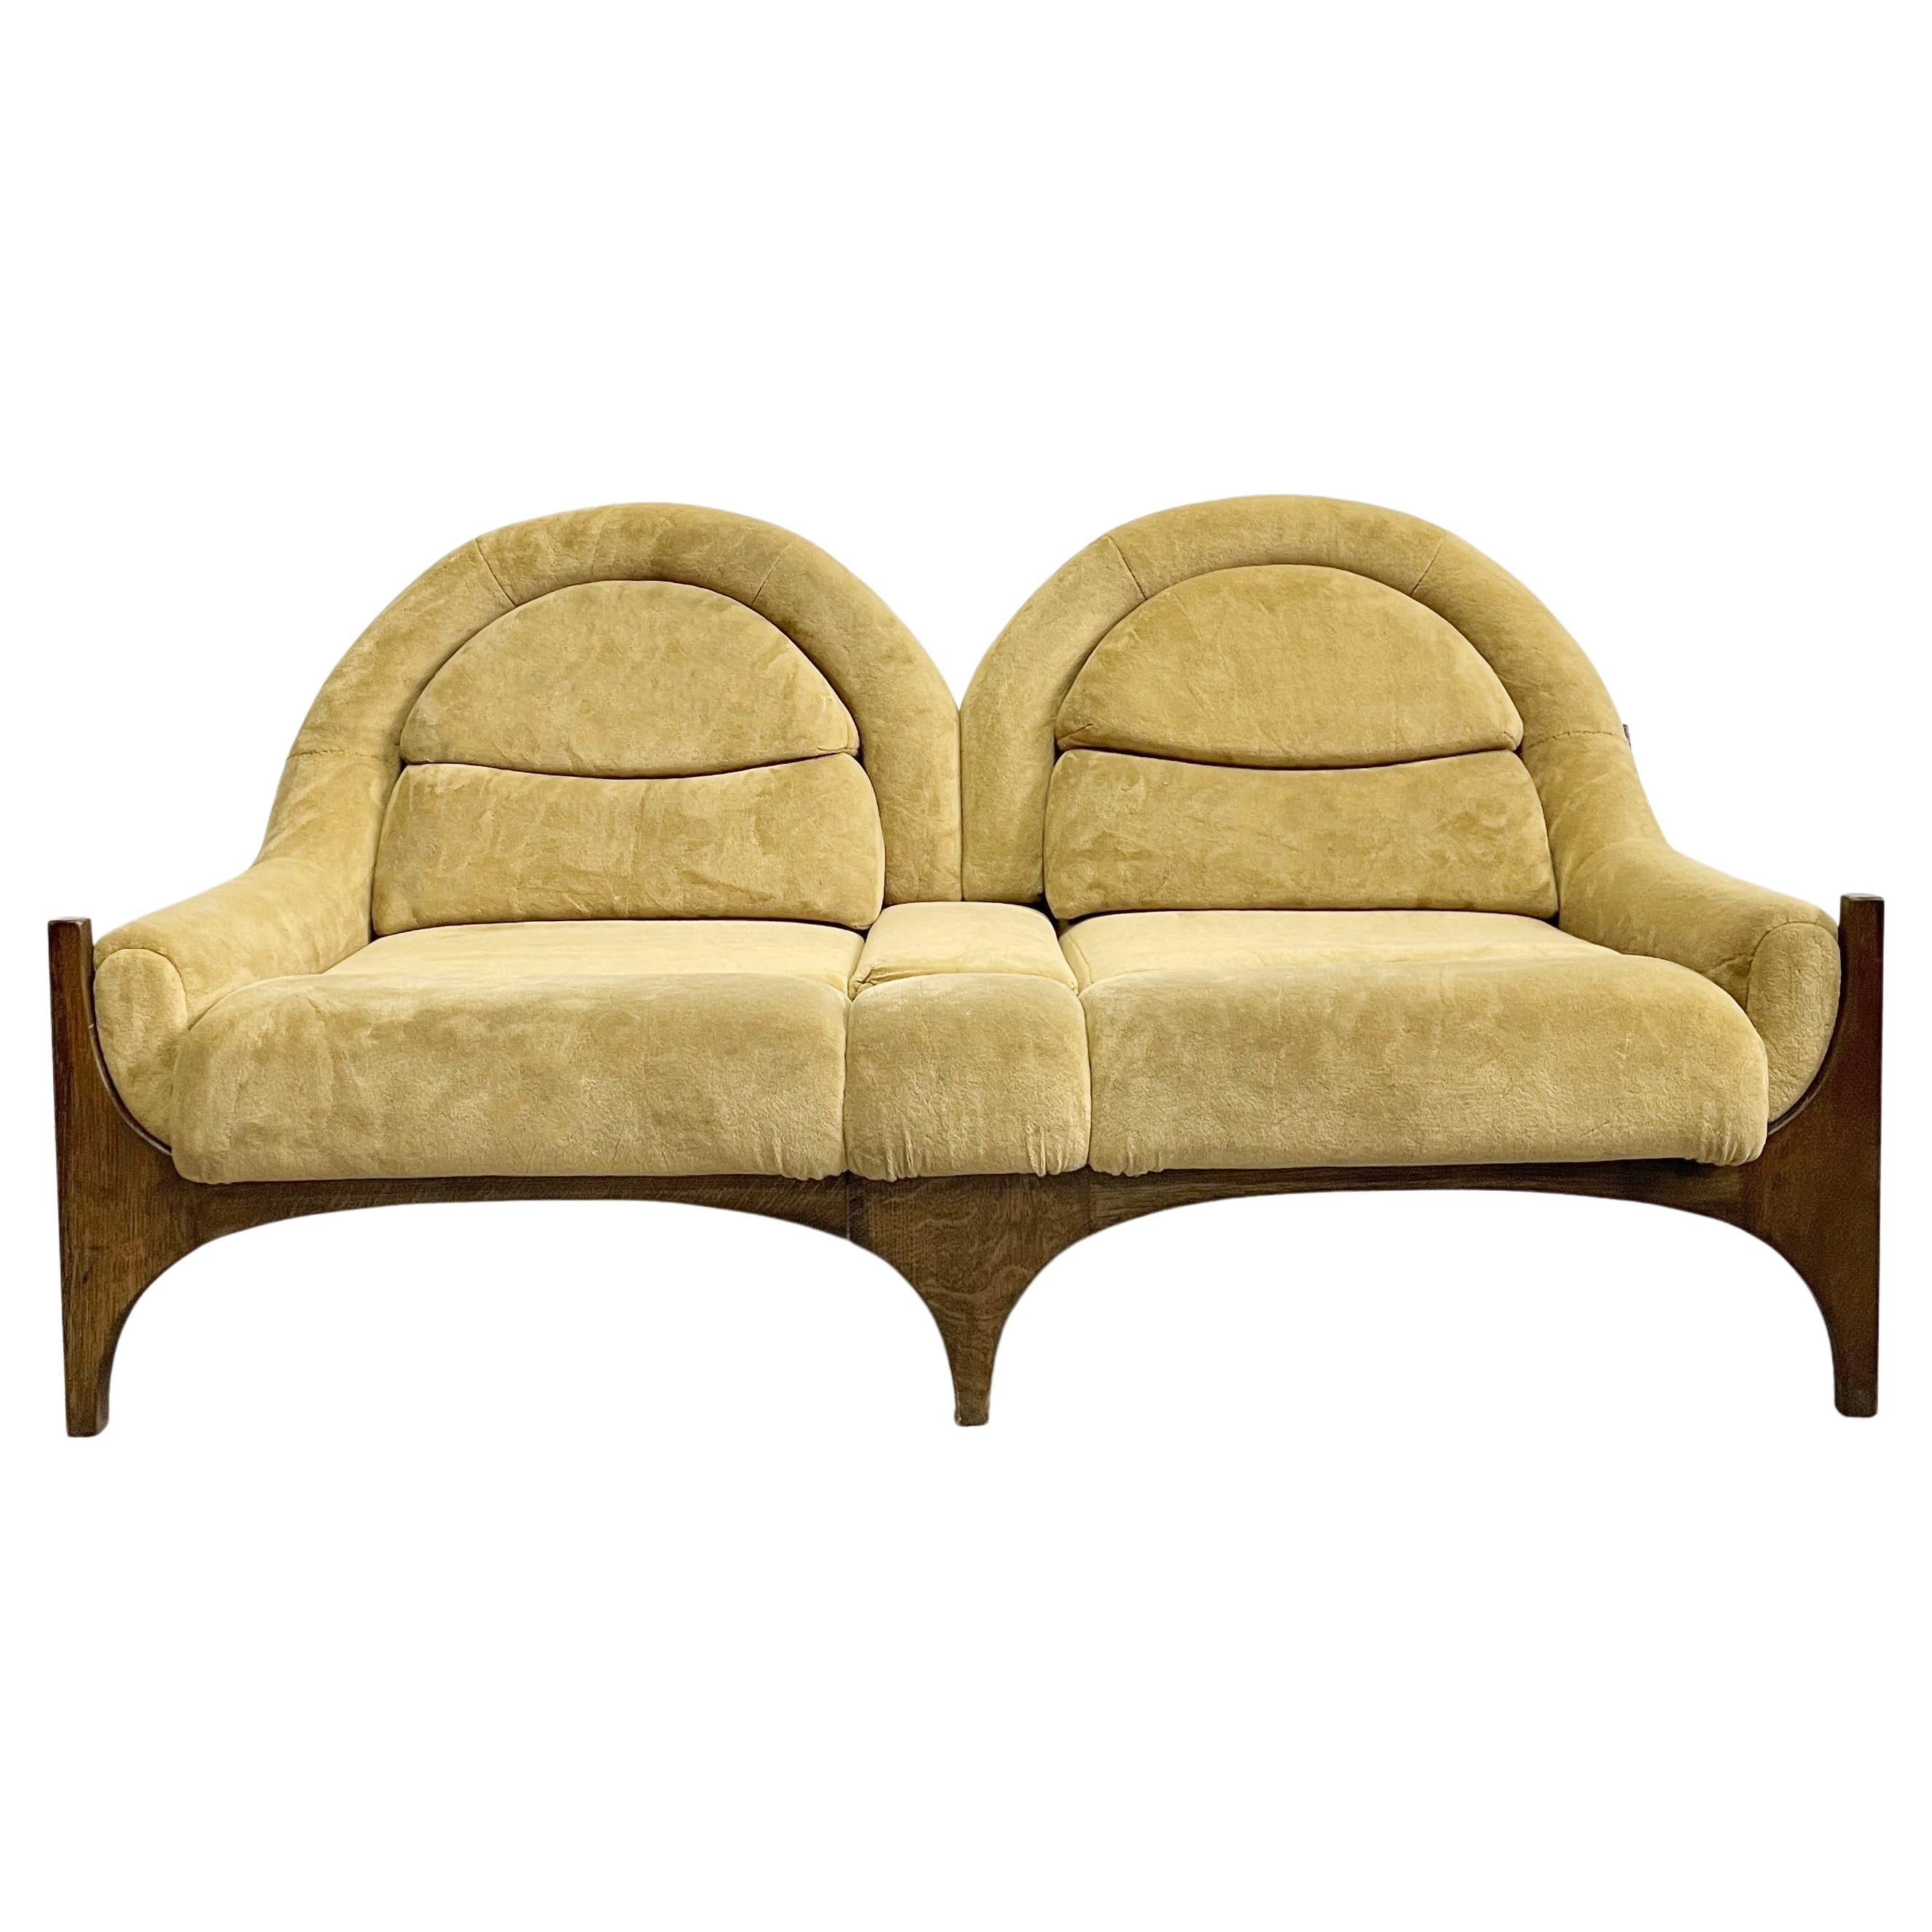 Mid-Century 2-Seat Sofa, Architectural Wooden Frame and Mustard Fabric, 1960s